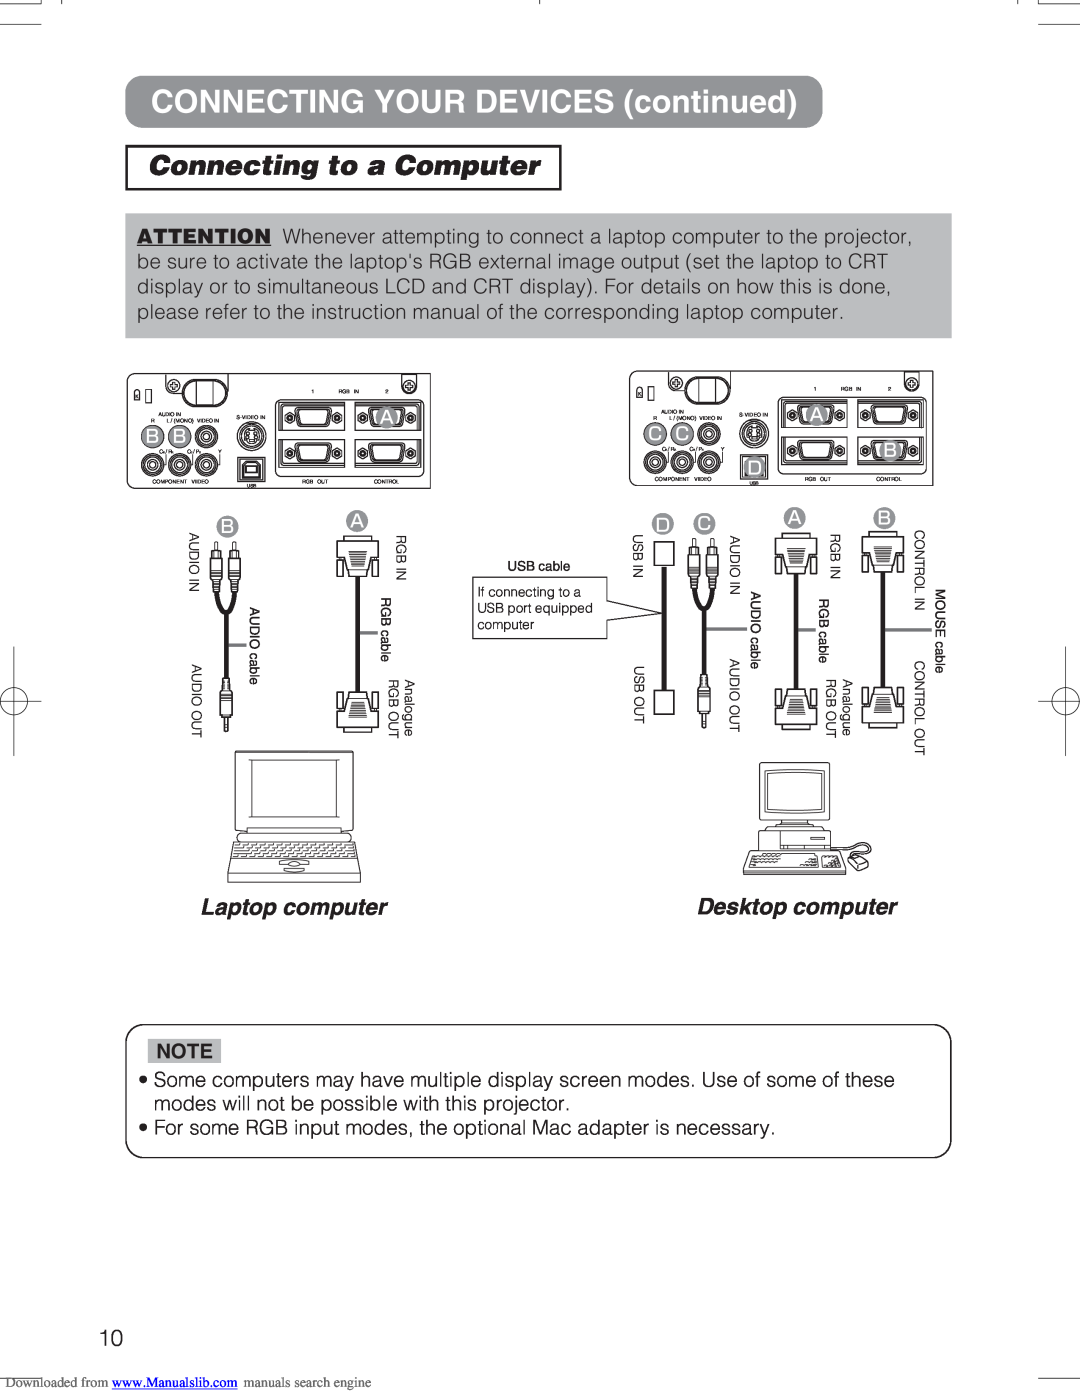 Hitachi CPX328W user manual CONNECTING YOUR DEVICES continued, Connecting to a Computer, Laptop computer, Desktop computer 